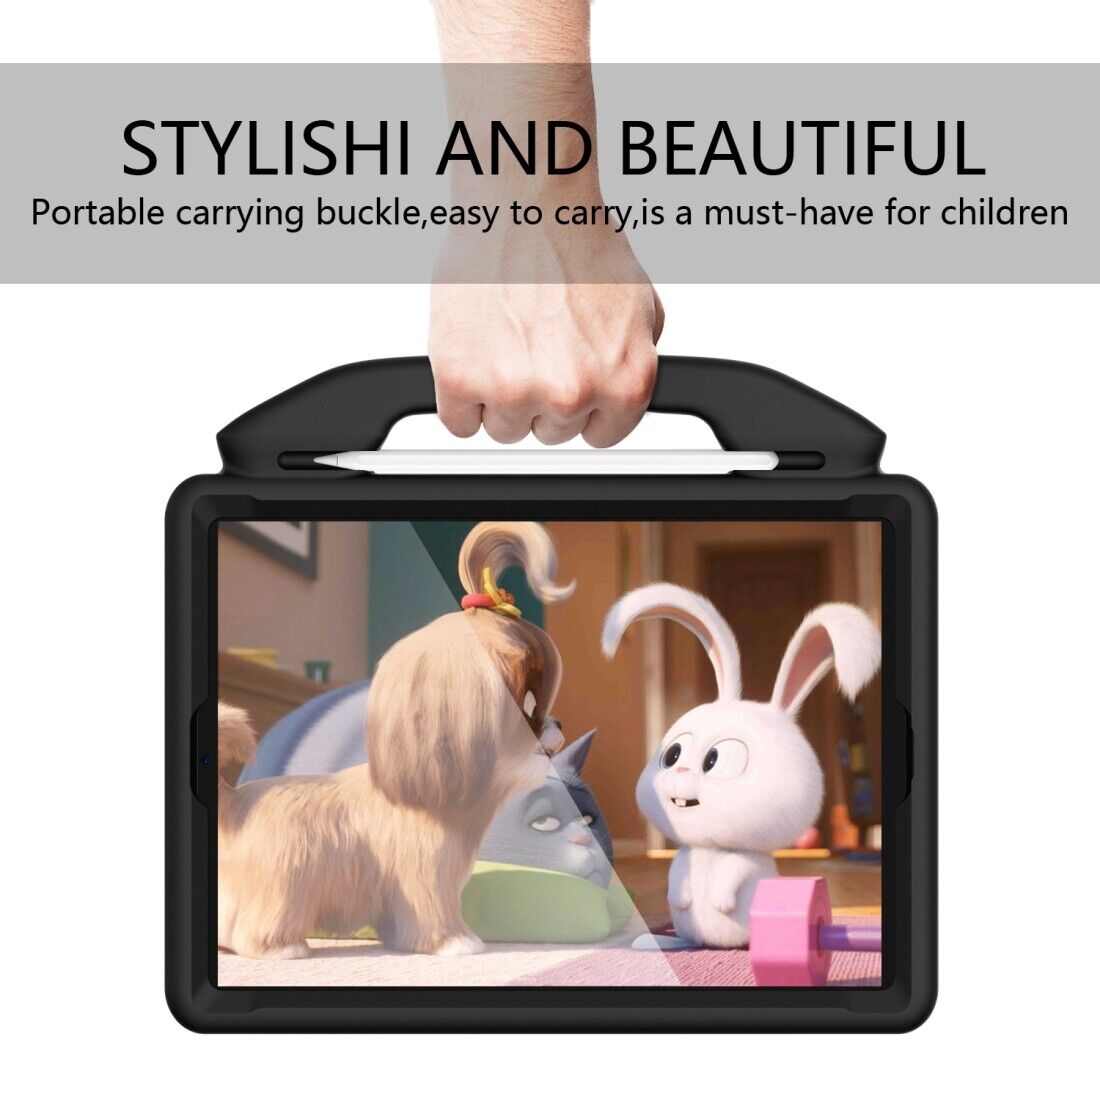 For Apple iPad 10.2 7th Gen 2019 Kids Friendly Case Shockproof Cover With Thumbs Up - Black-www.firsthelptech.ie